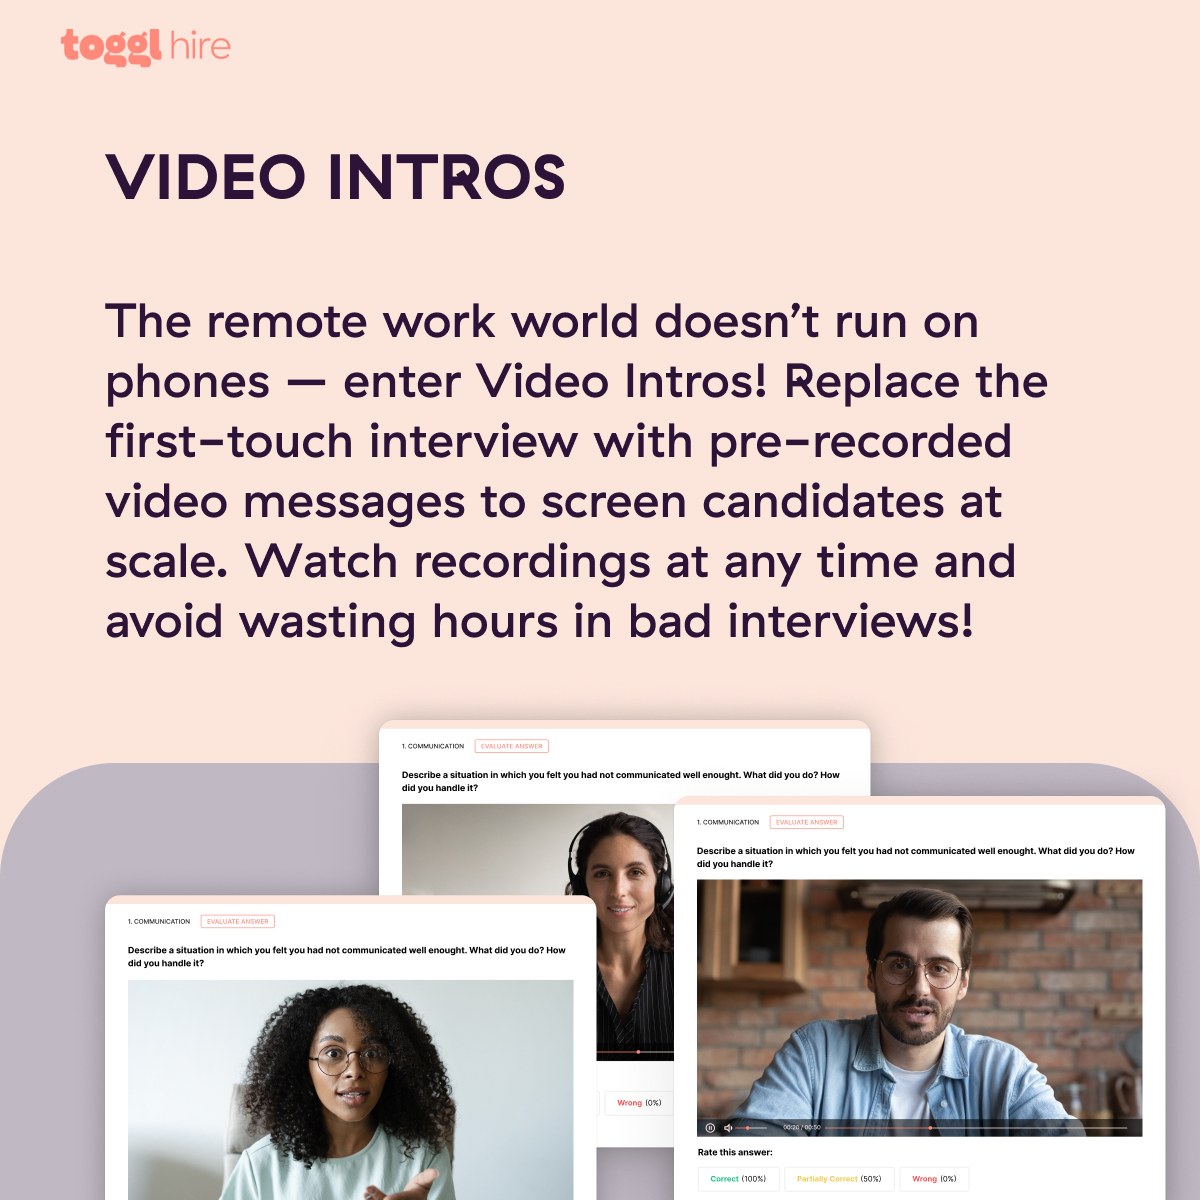 Our built-in video interviewing capability helps remote hiring teams screen candidates efficiently and asynchronously. Pick up to 3 questions from our library, invites candidates to answer on video and review recordings at your convenience.  